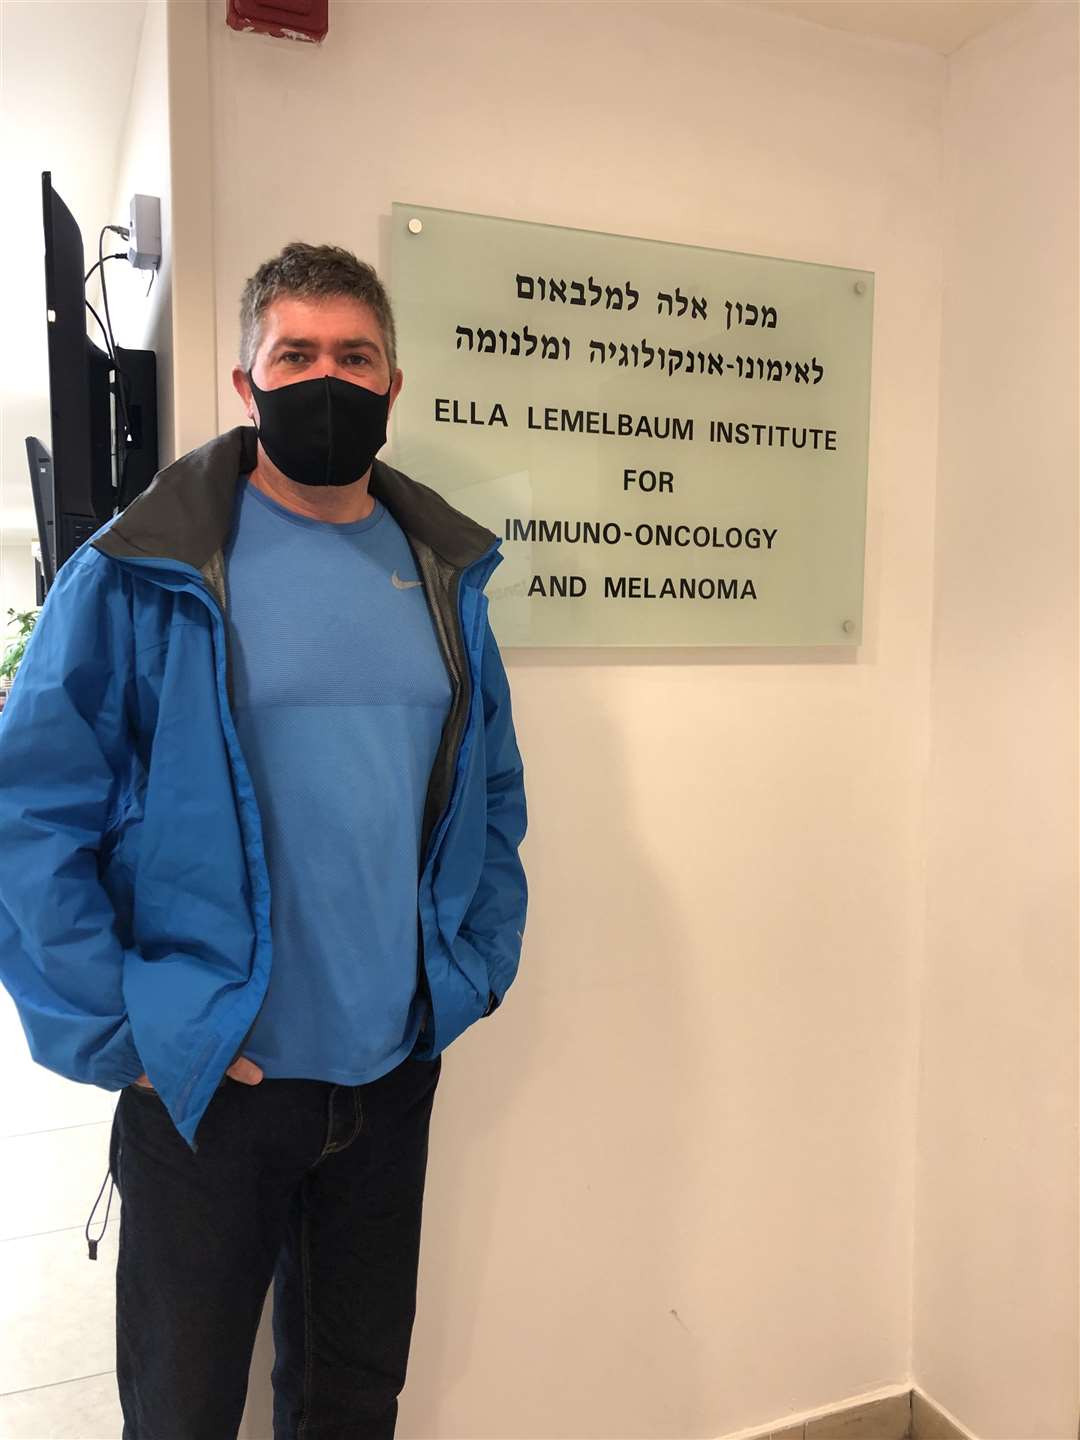 Mark was treated at the Sheba Medical Center in Tel Aviv, the capital of Israel